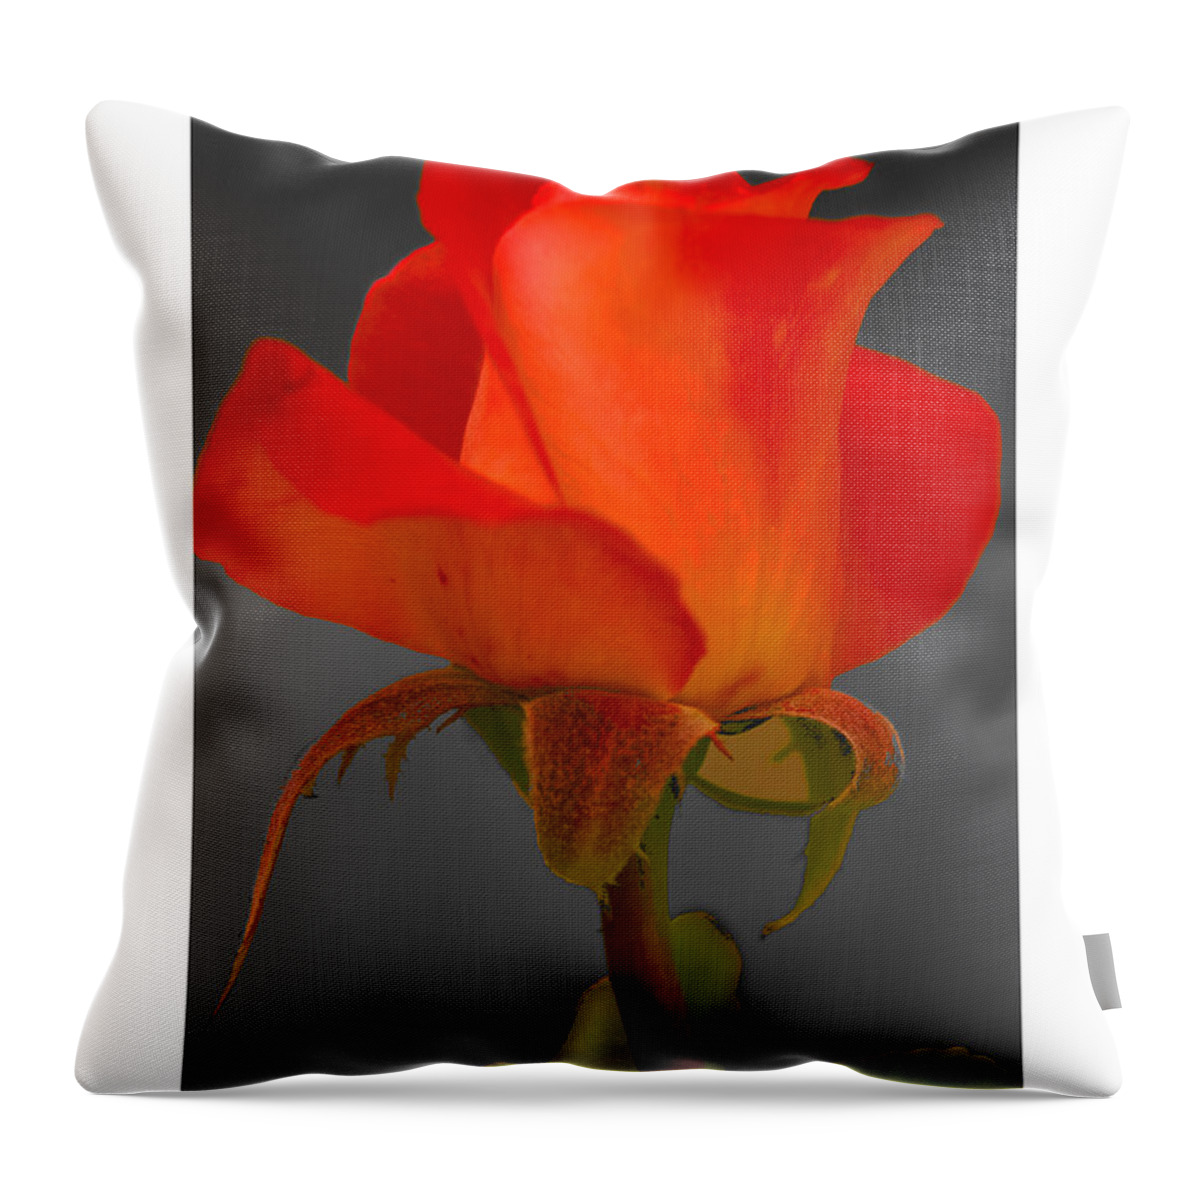  Throw Pillow featuring the photograph By Any Other Name by R Thomas Berner